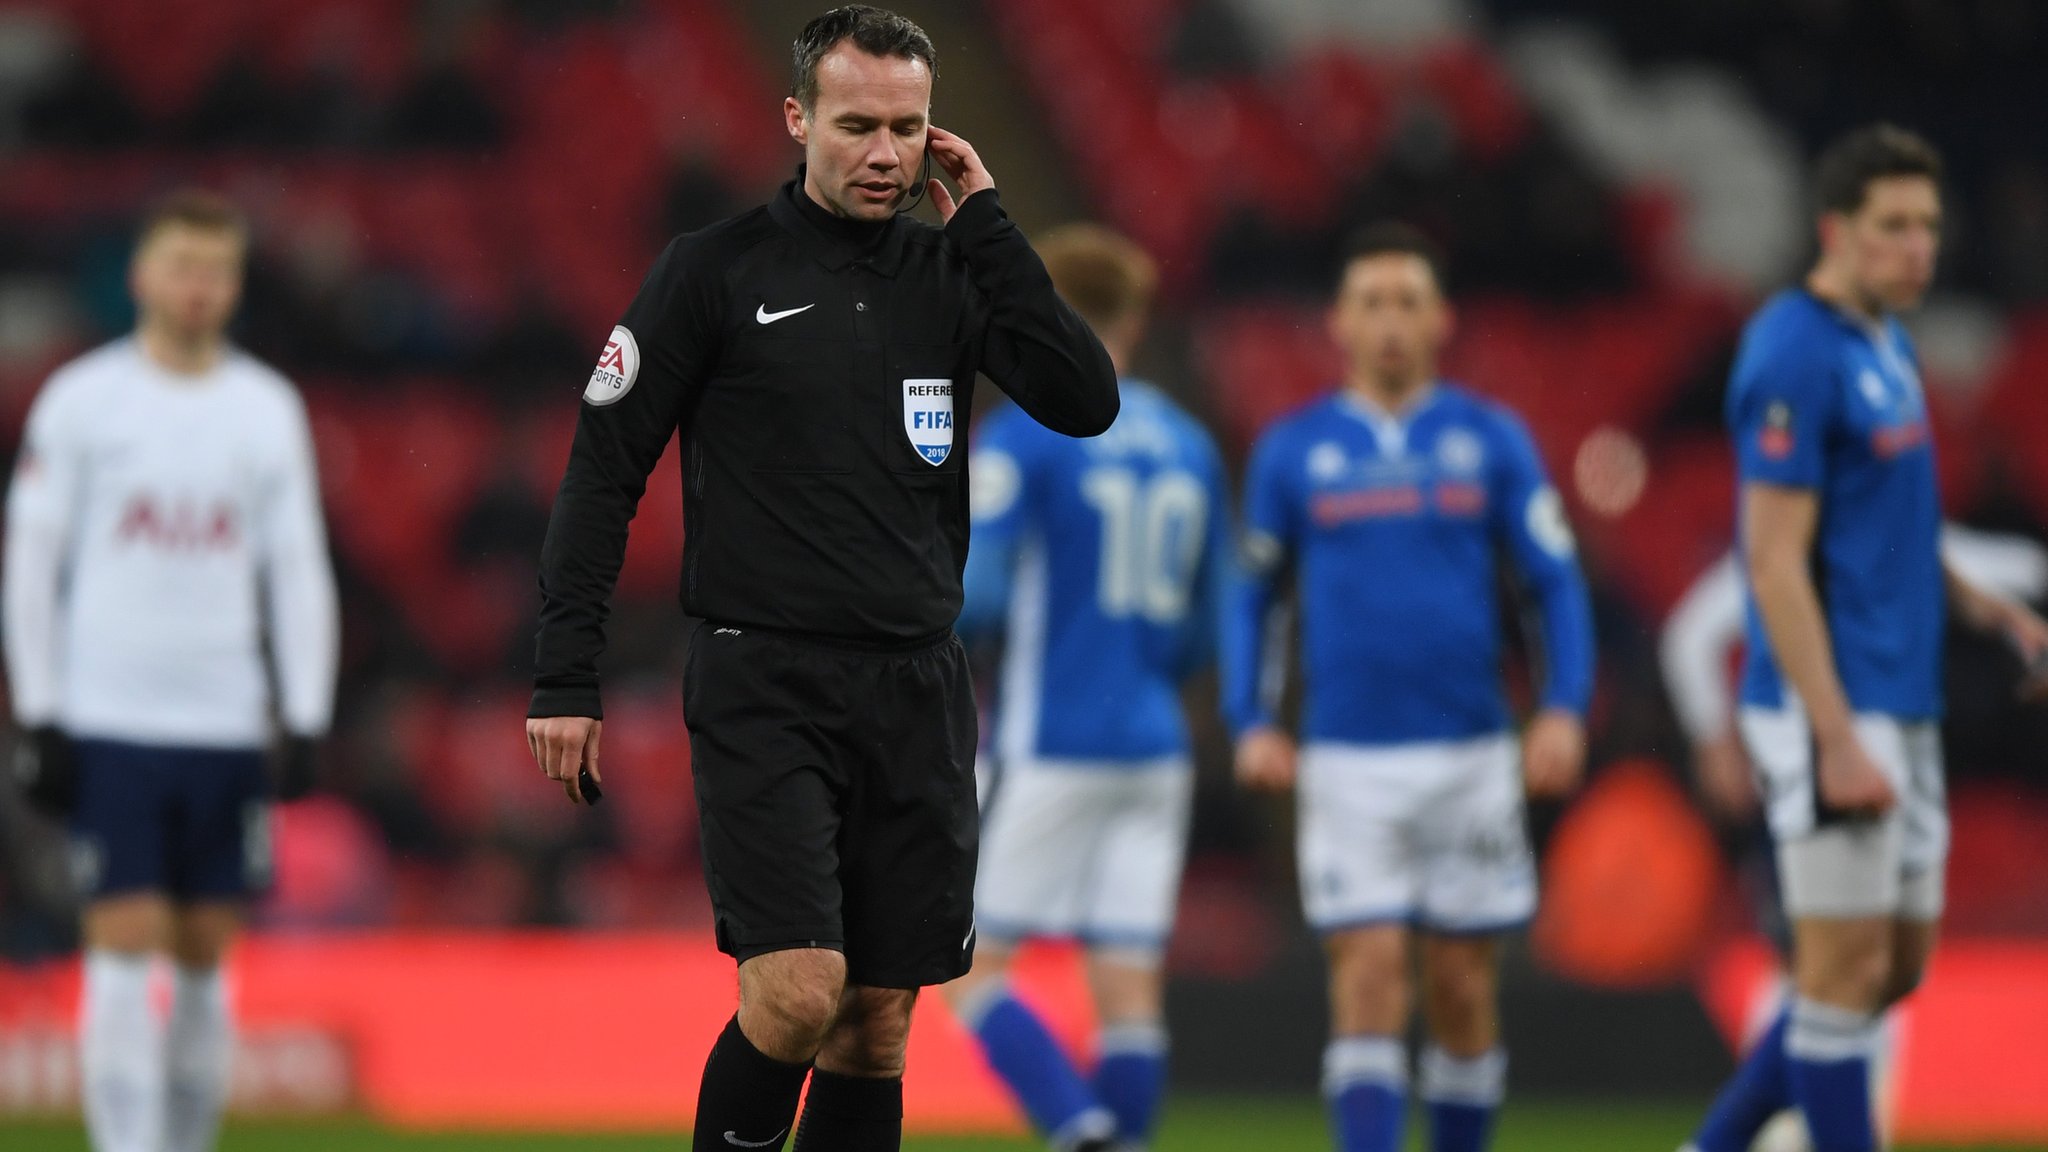 'Comical' & 'embarrassing' - pundits & fans react as VAR takes centre stage at Wembley